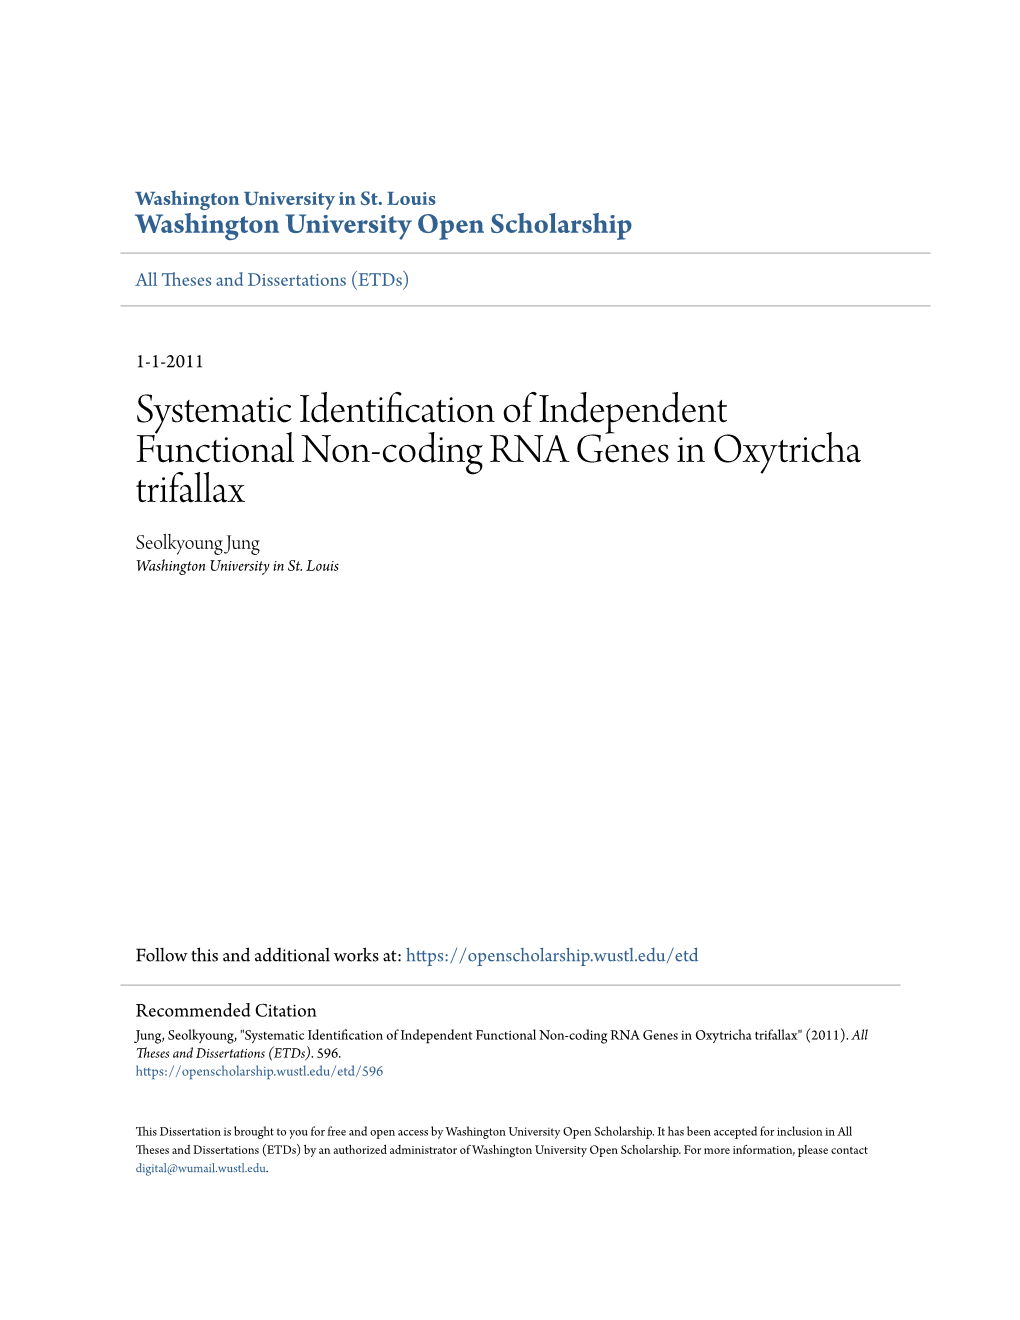 Systematic Identification of Independent Functional Non-Coding RNA Genes in Oxytricha Trifallax Seolkyoung Jung Washington University in St